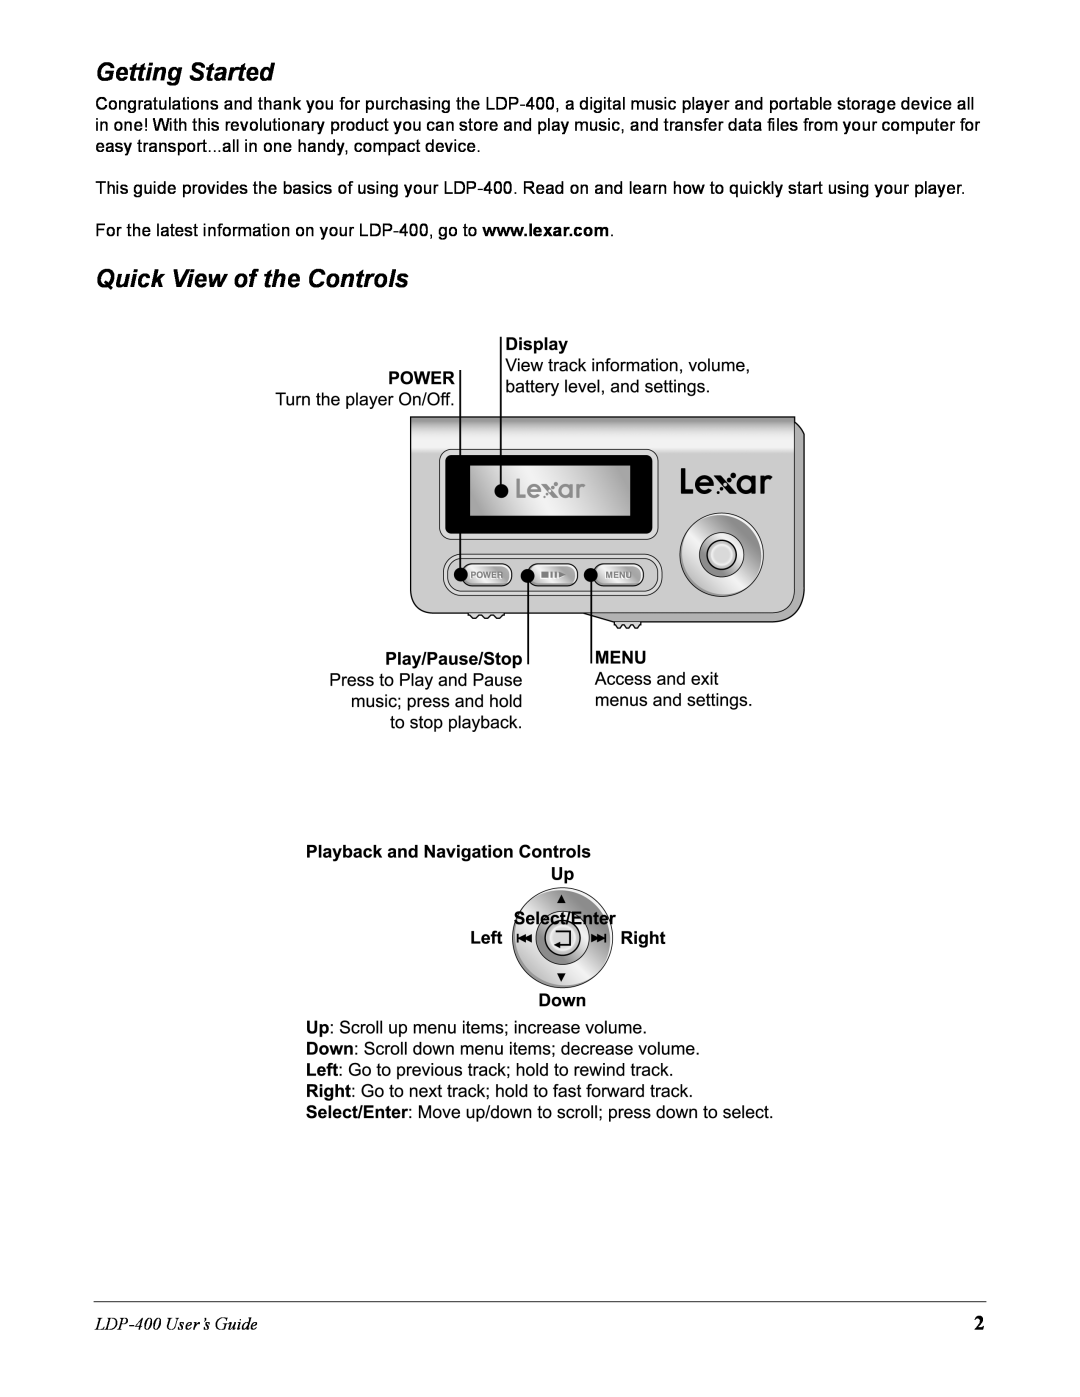 Lexar Media manual Getting Started, Quick View of the Controls, LDP-400User’s Guide 